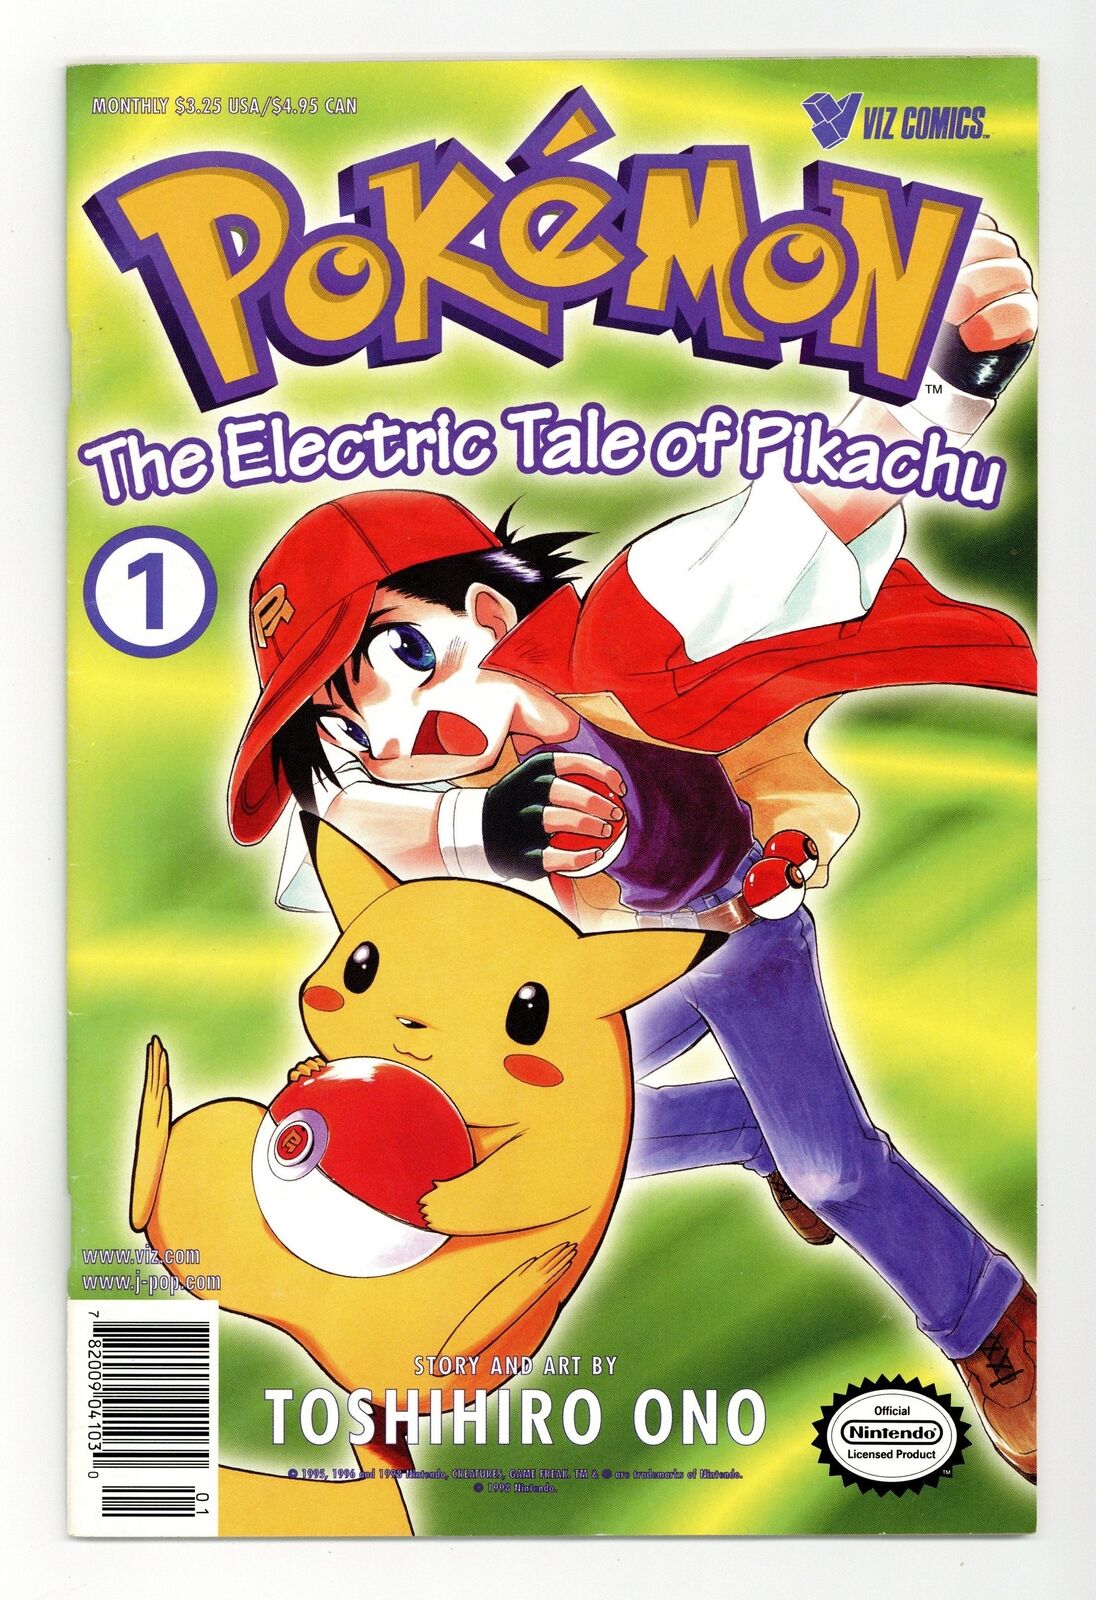 Pokemon Part 1 The Electric Tale of Pikachu #1 FN- 5.5 1999 1st Printing